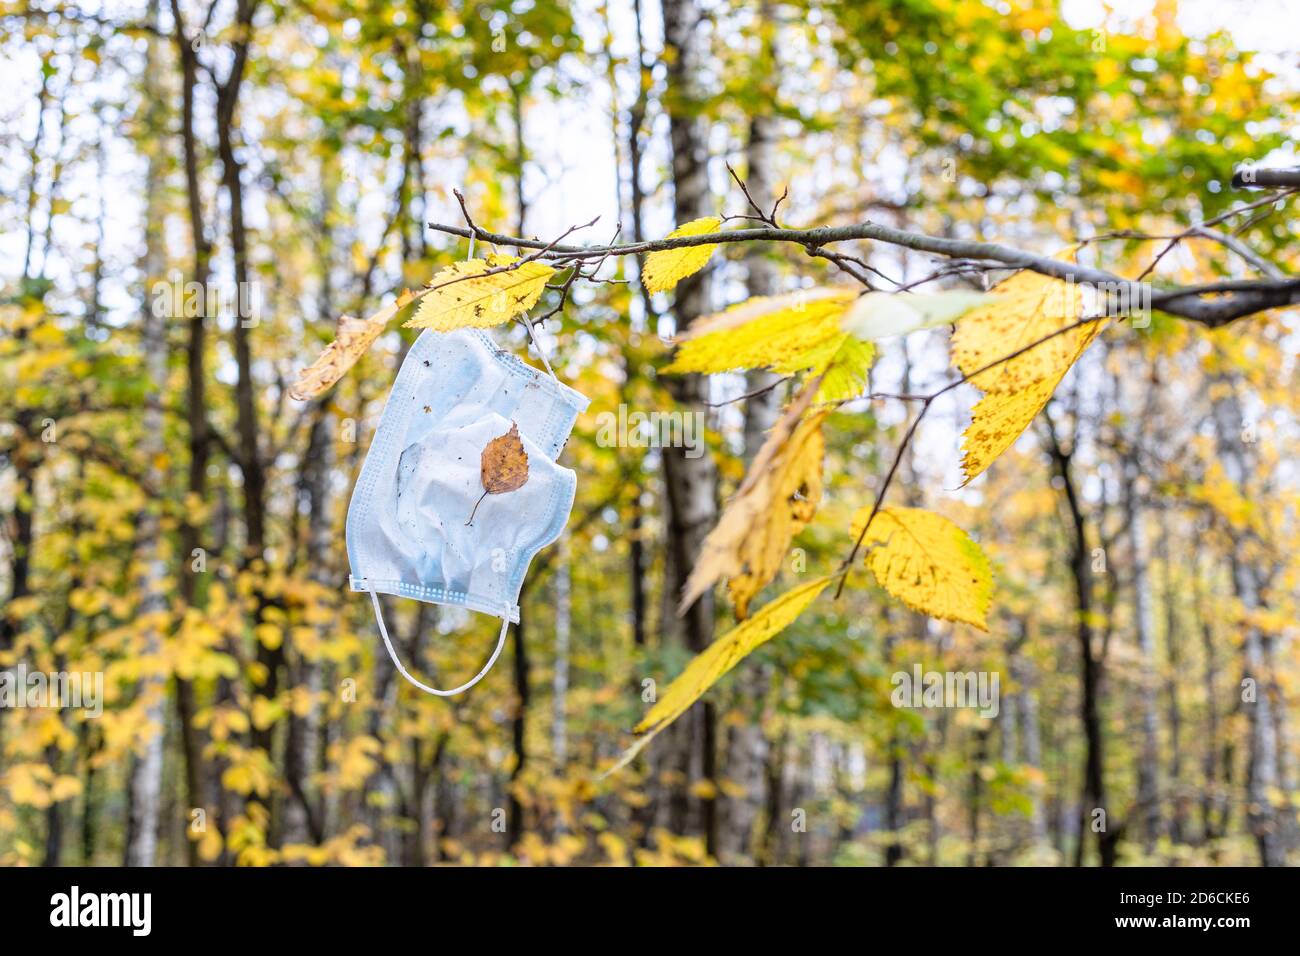 Trash Can With Black Plastic Bag And Green Cut Tree Branches Stock Photo -  Download Image Now - iStock